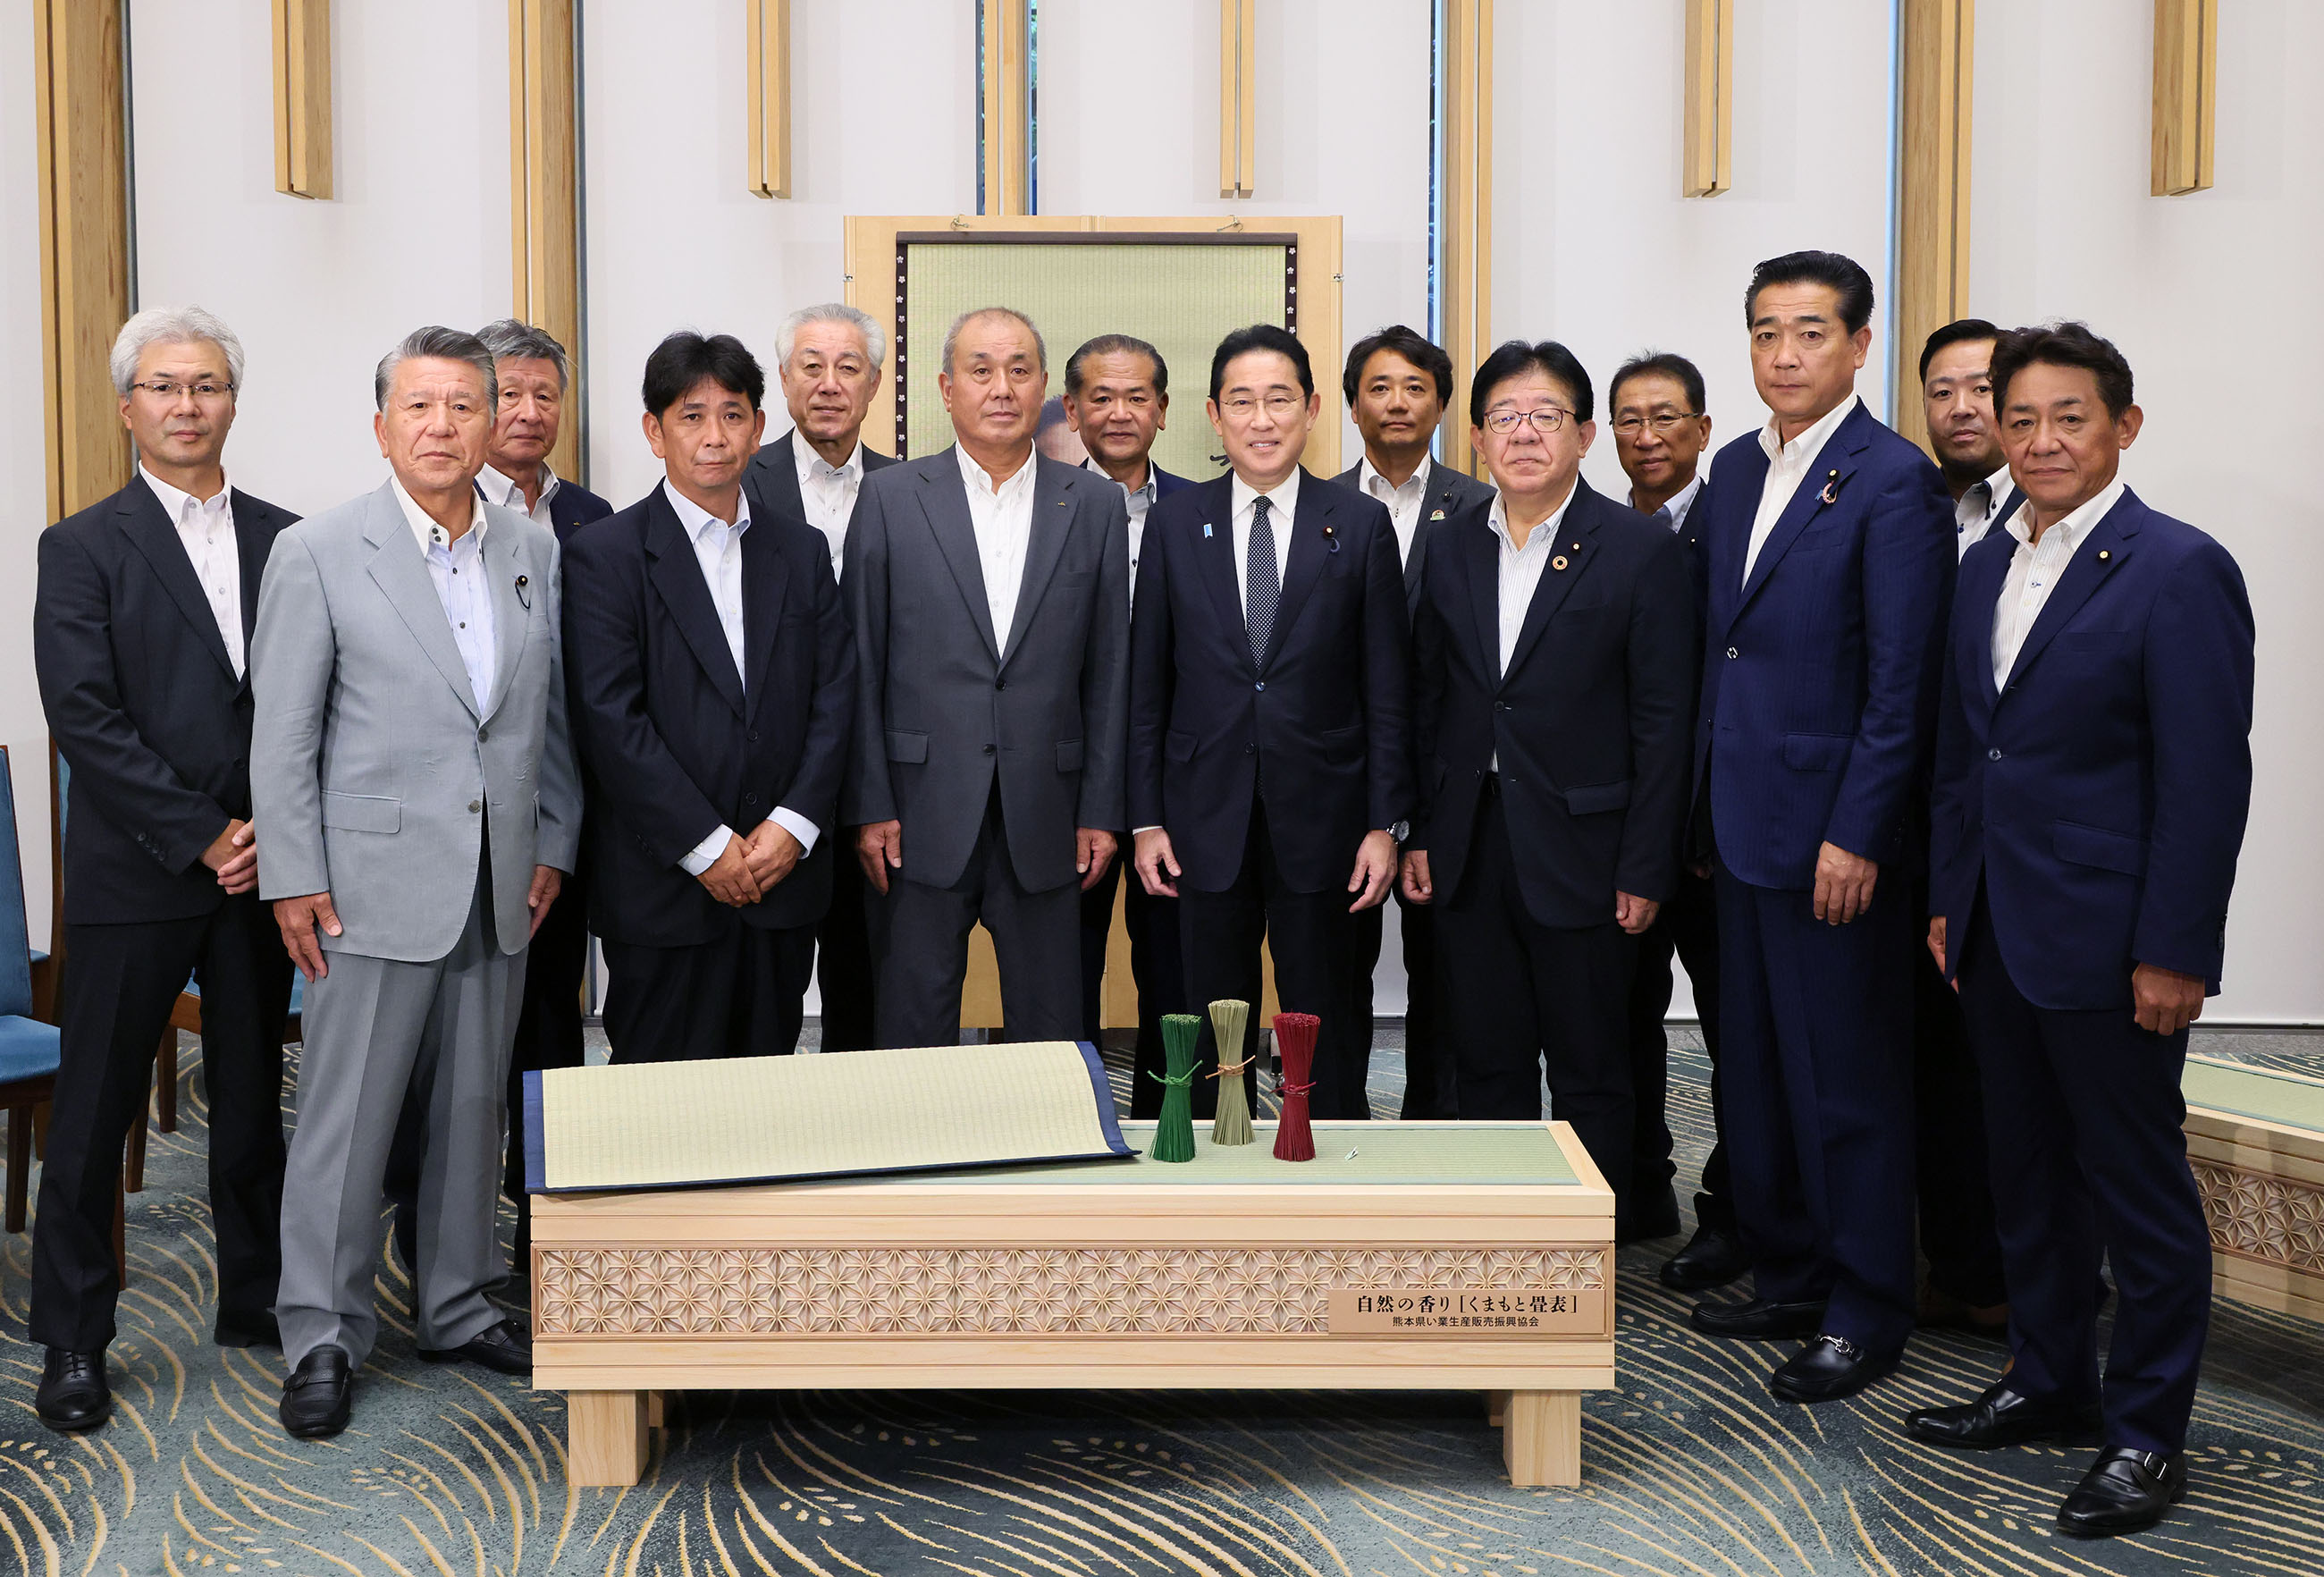 Prime Minister Kishida being presented with igusa products (1)